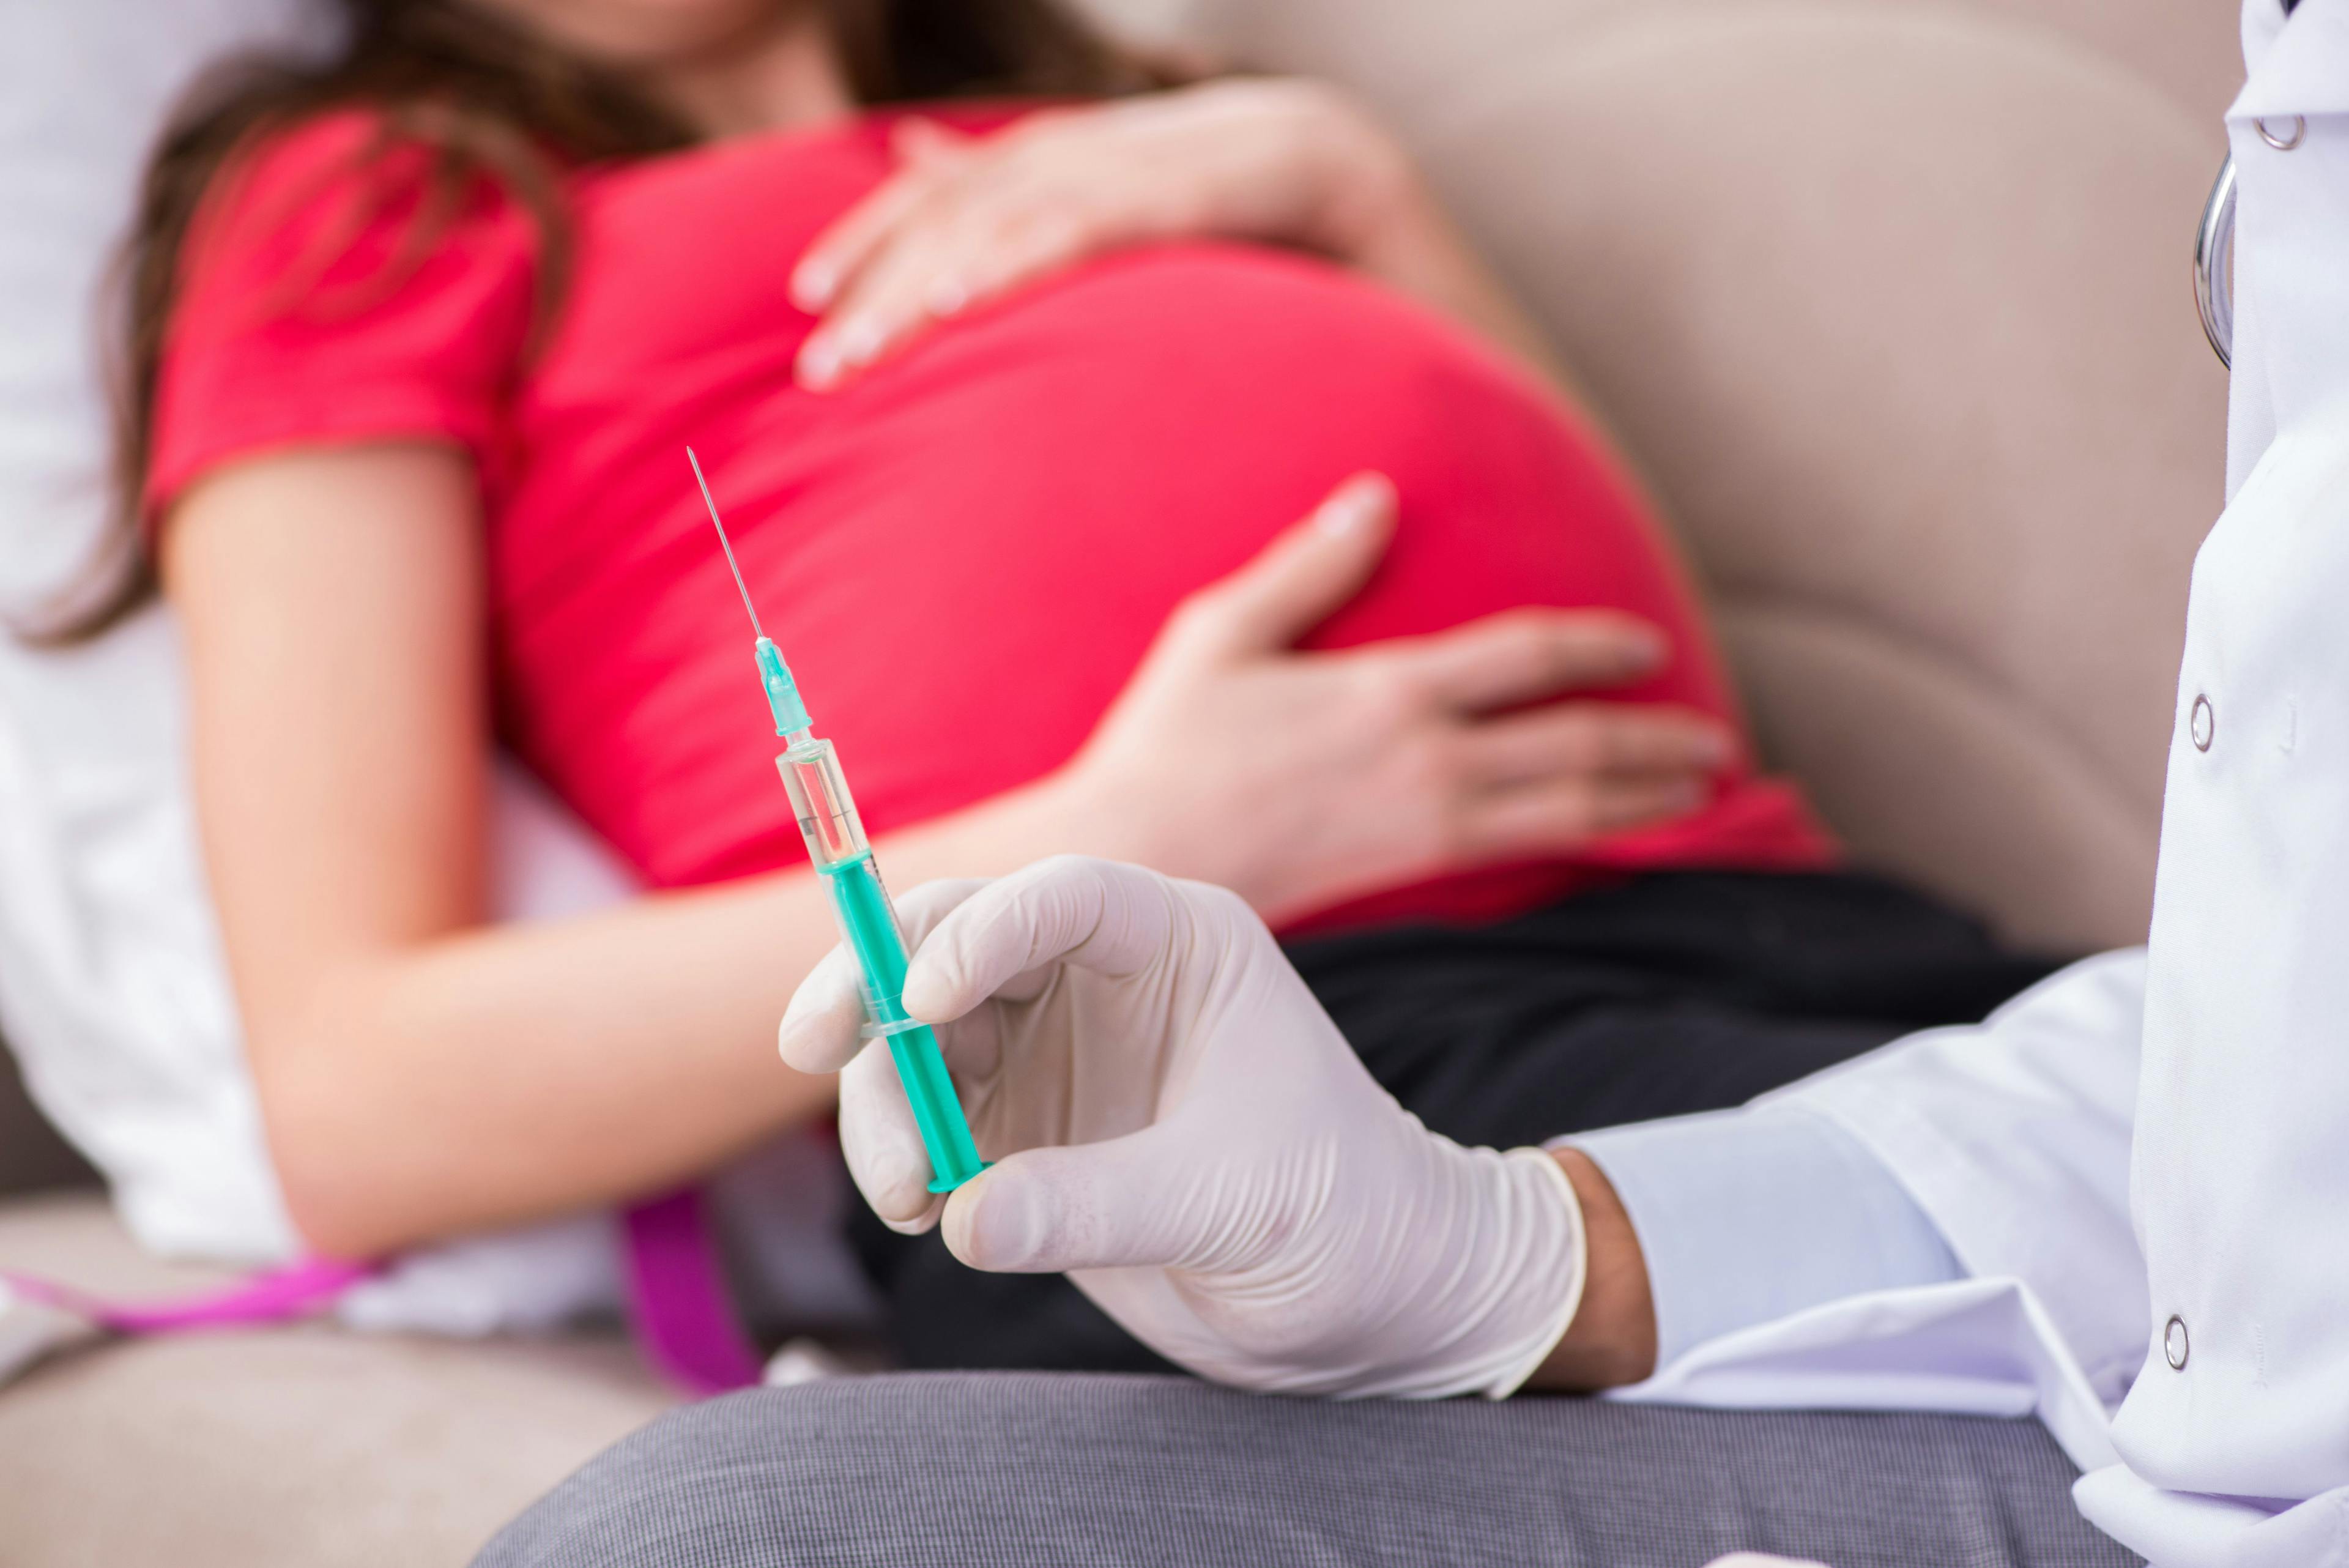 Artificial insemination outcomes not impacted by COVID-19 vaccination status